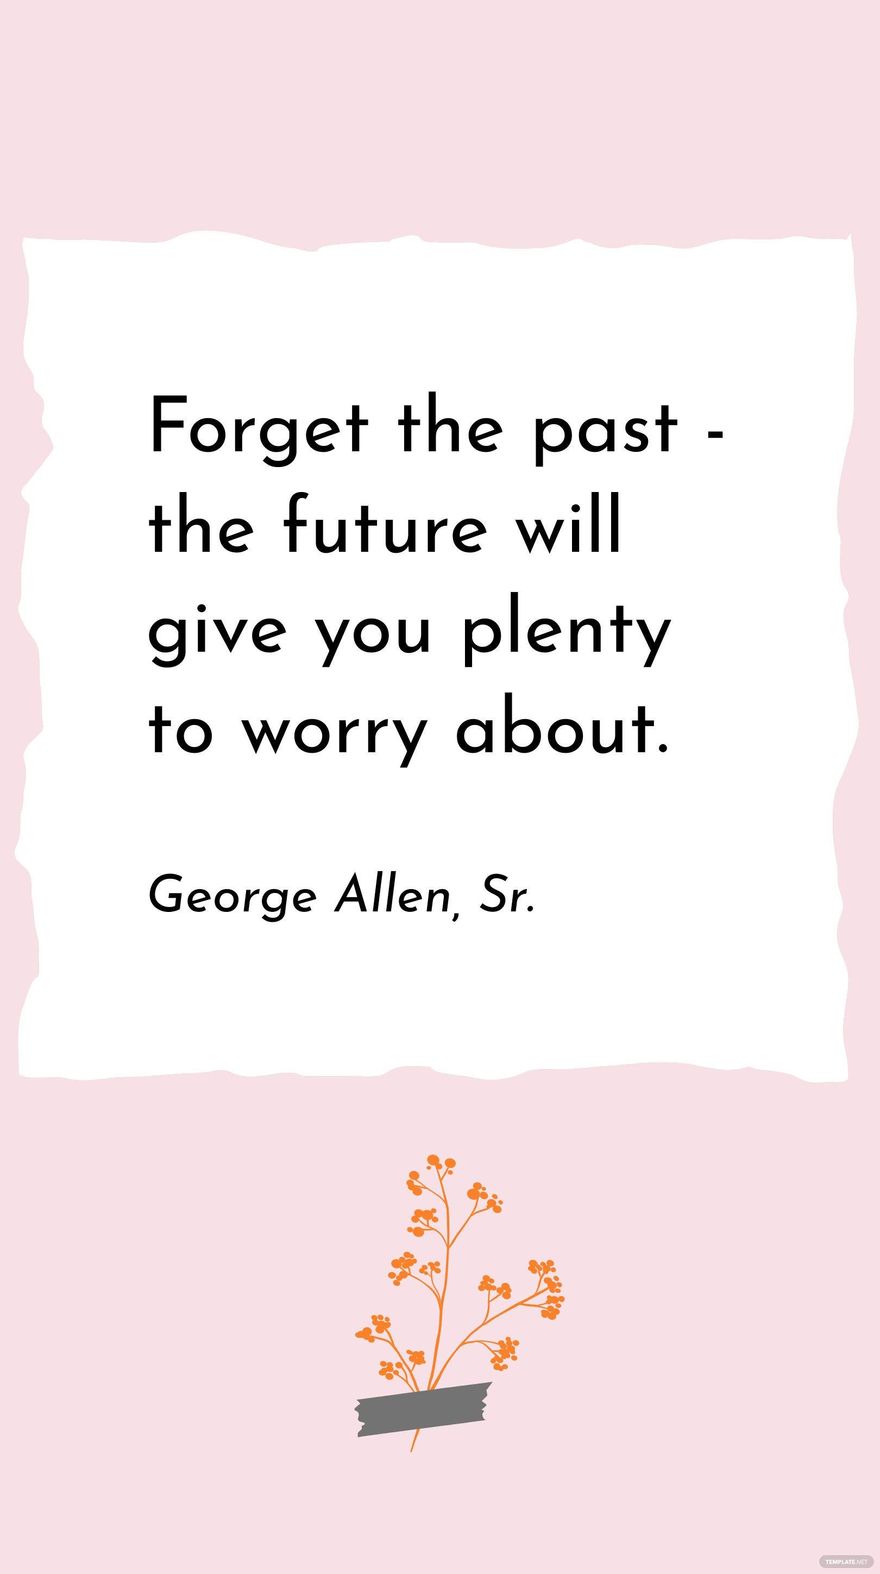 Free George Allen, Sr. - Forget the past - the future will give you plenty to worry about. in JPG